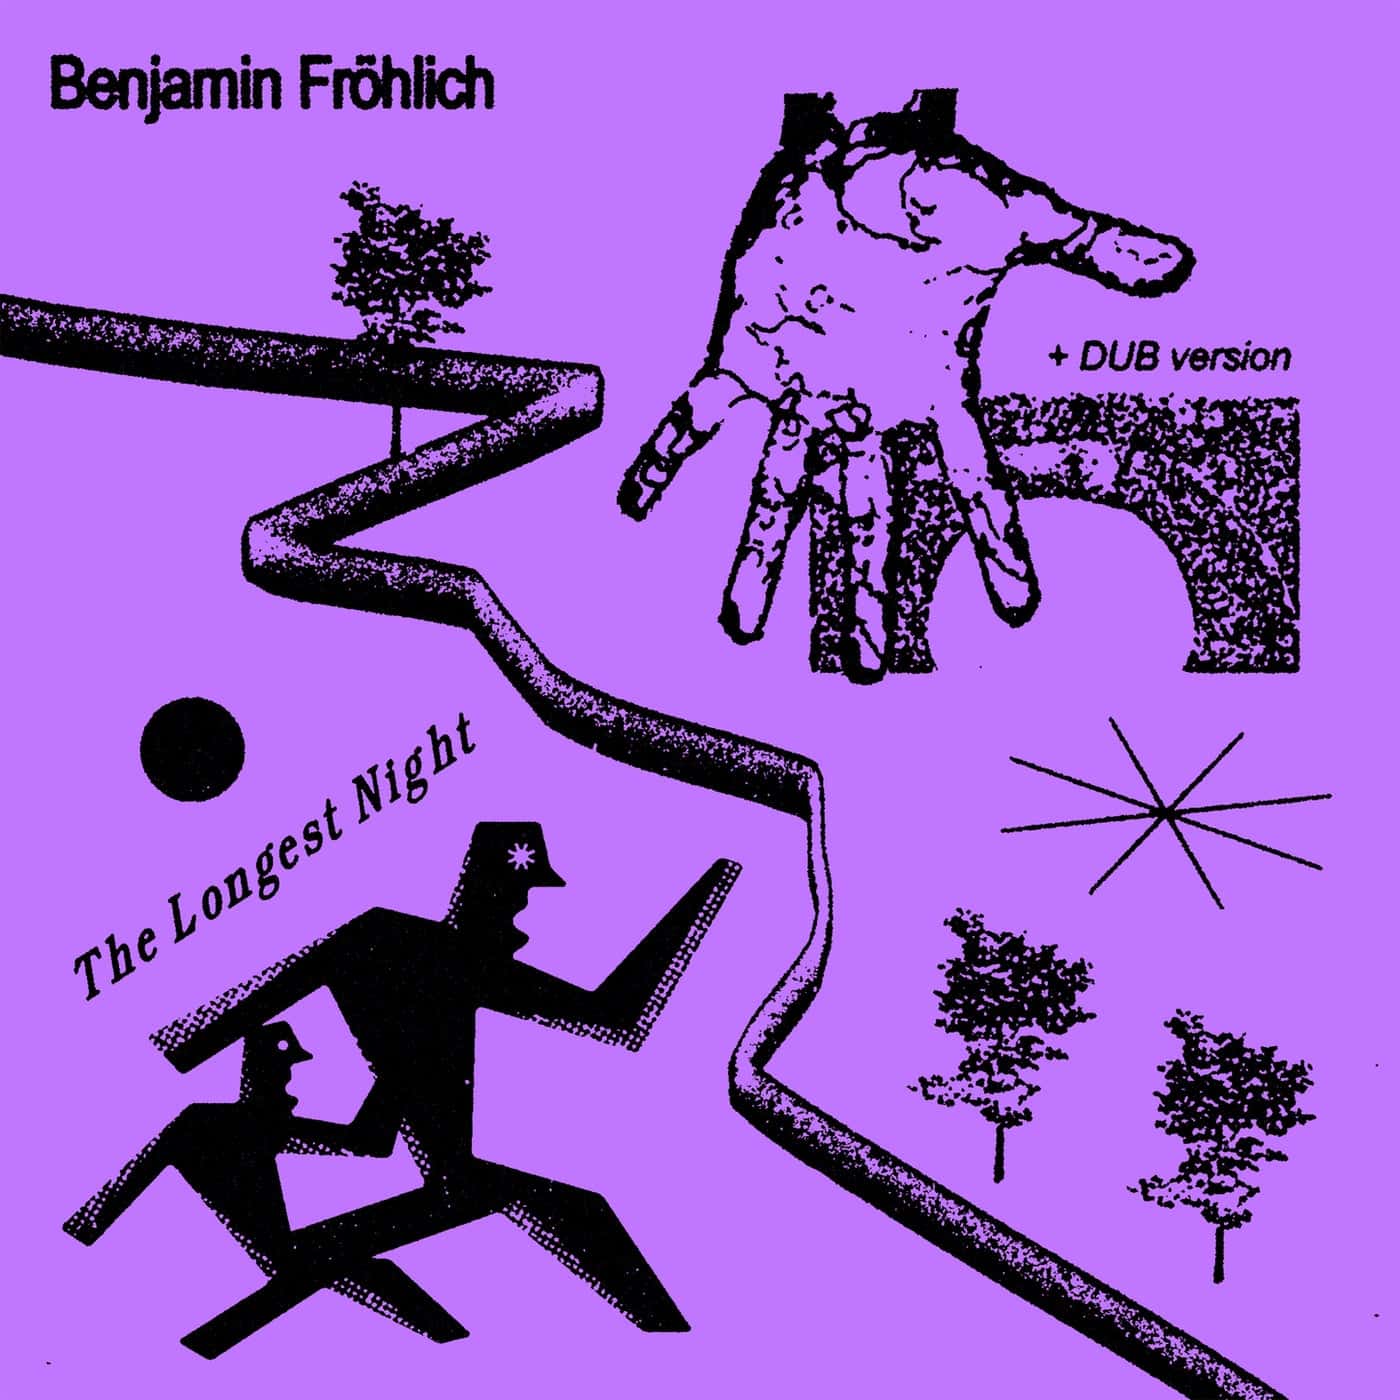 Download Benjamin Fröhlich - The Longest Night on Electrobuzz